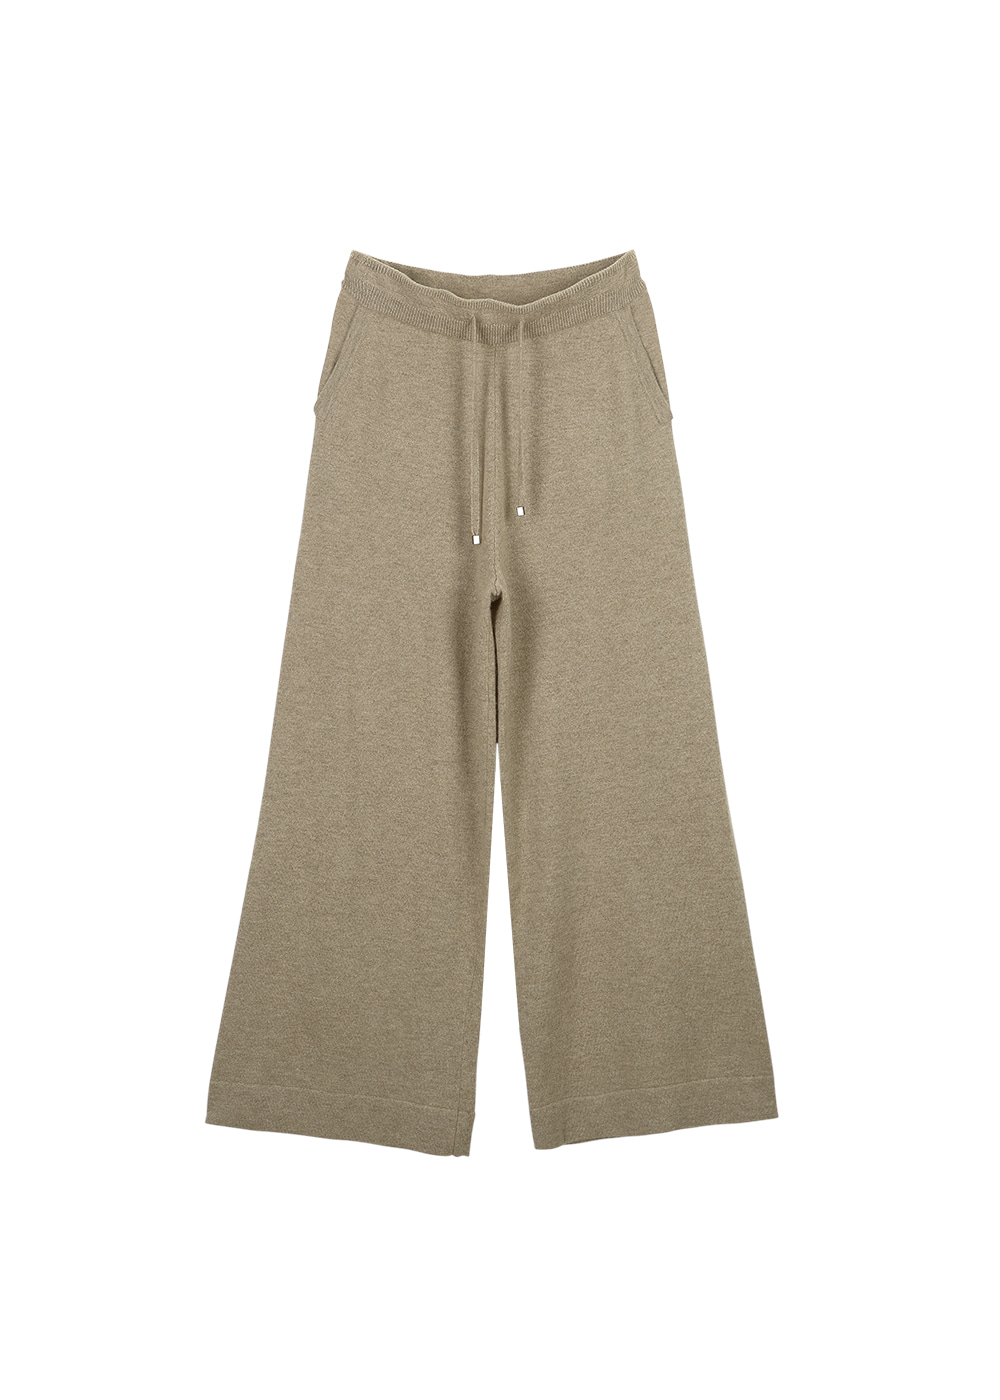 Wide fit knit pants(cappuccino) 20%